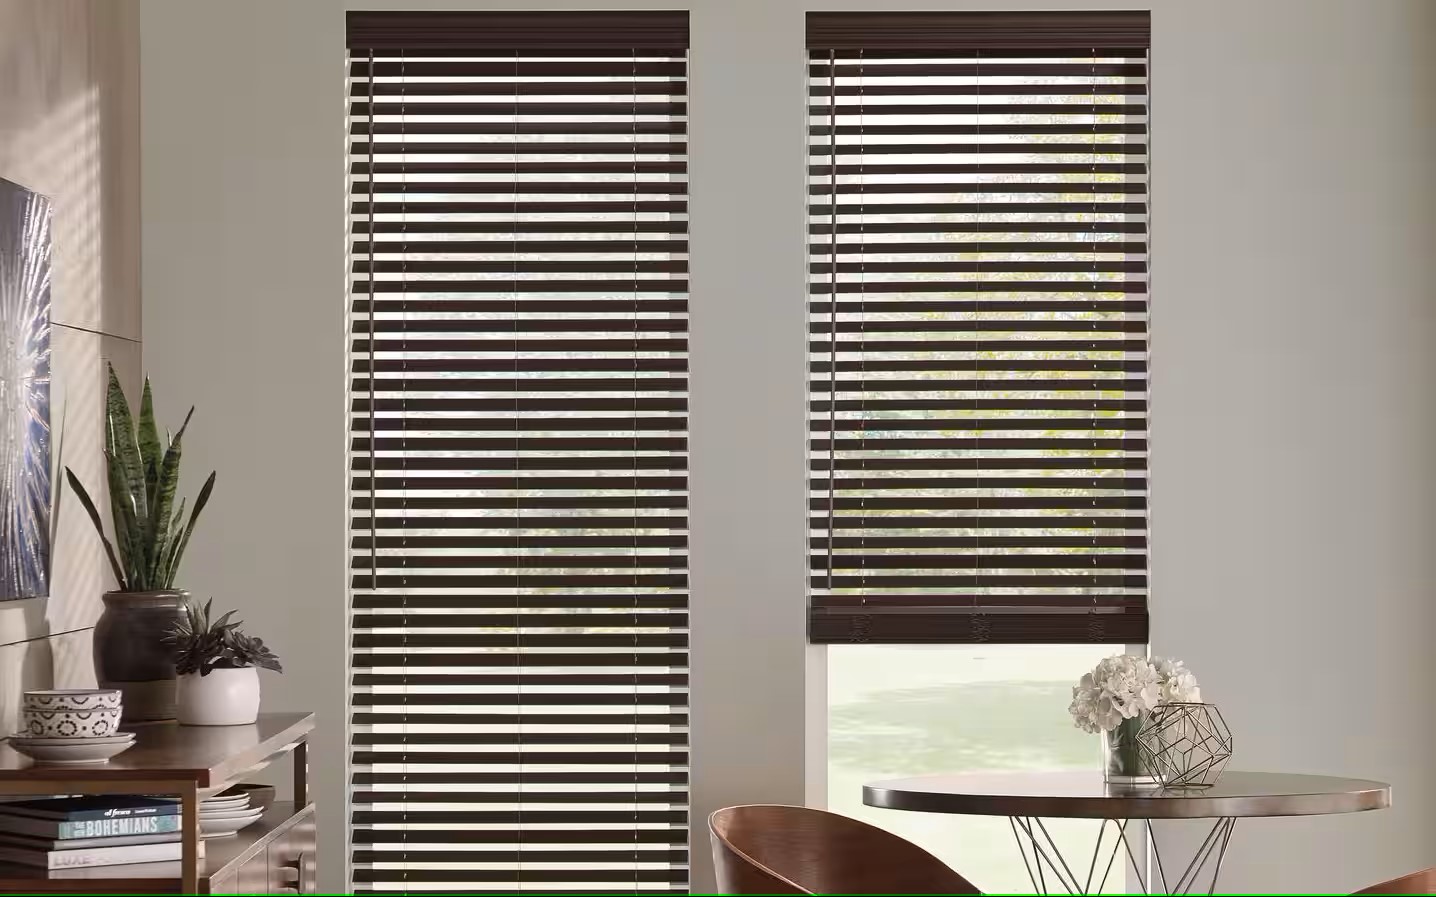 How To Lower Blinds